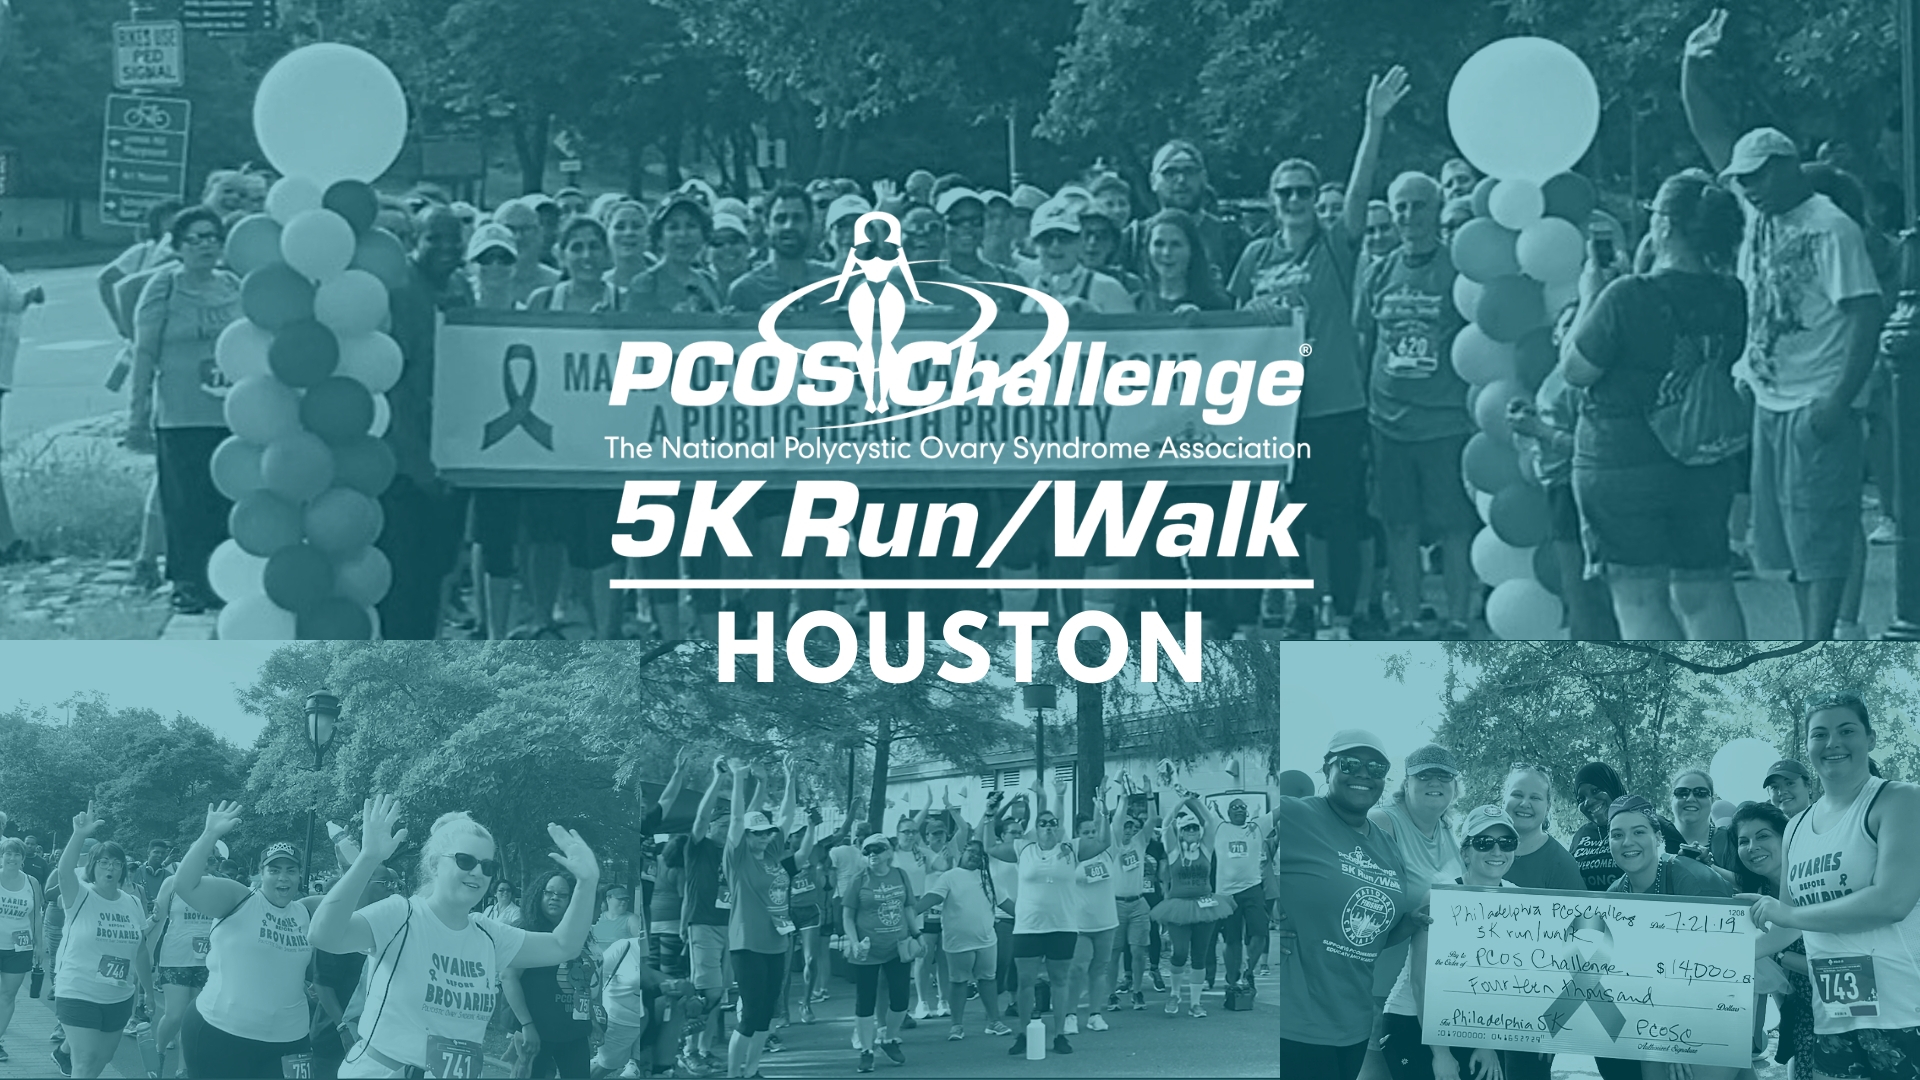 Houston PCOS Walk 5K PCOS Challenge The National Polycystic Ovary